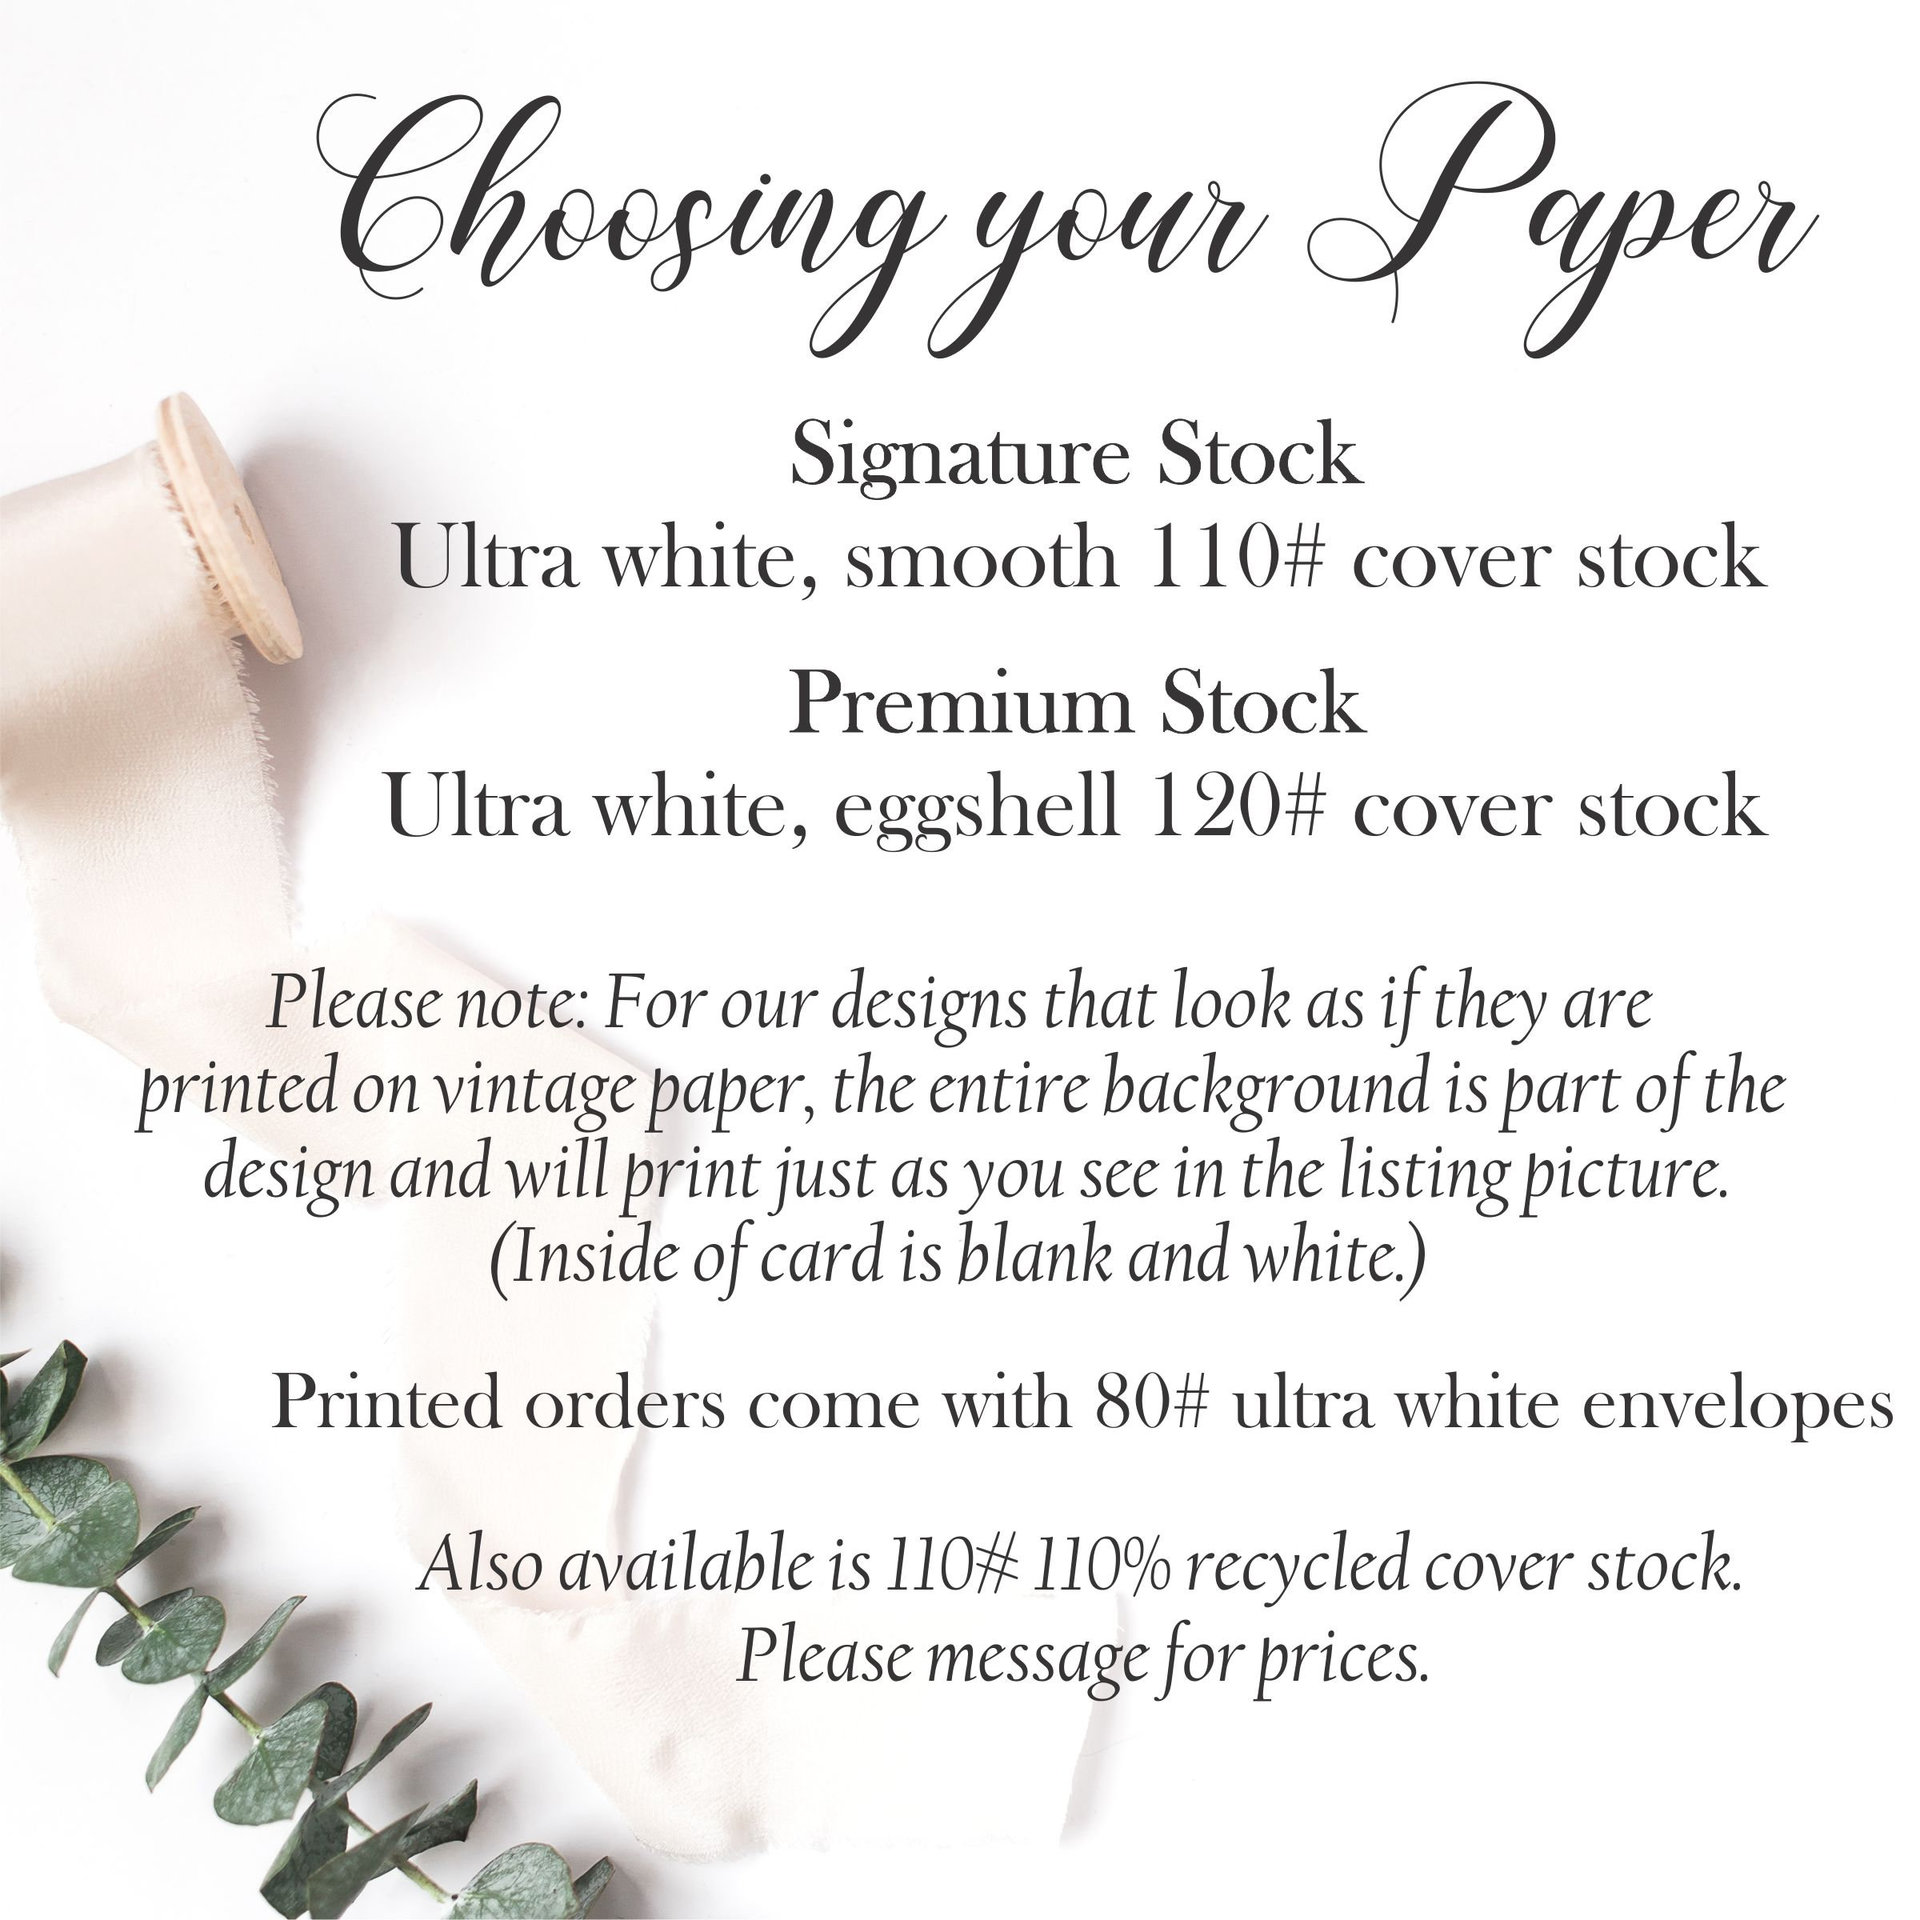 Winter Wedding Thank You Card, Poinsettia, Pine and Holly Note Card